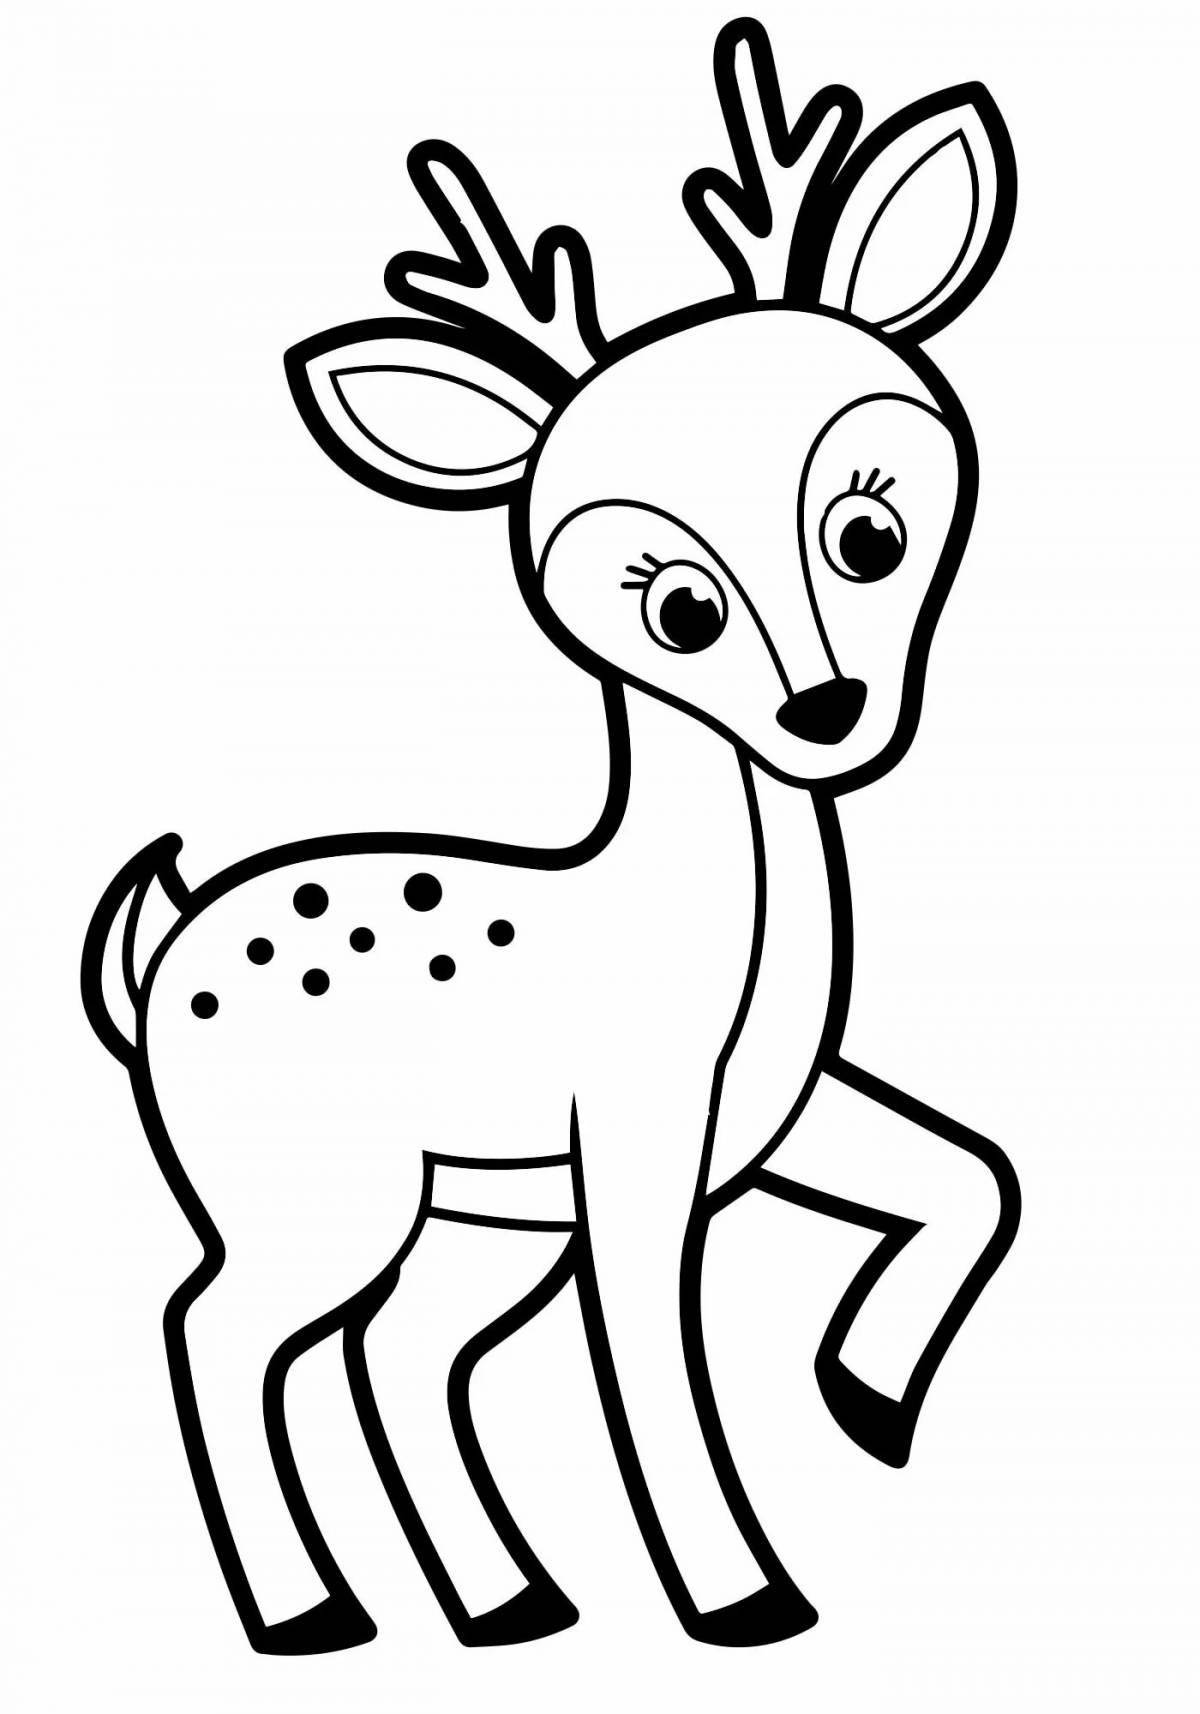 Serendipitous baby deer coloring page